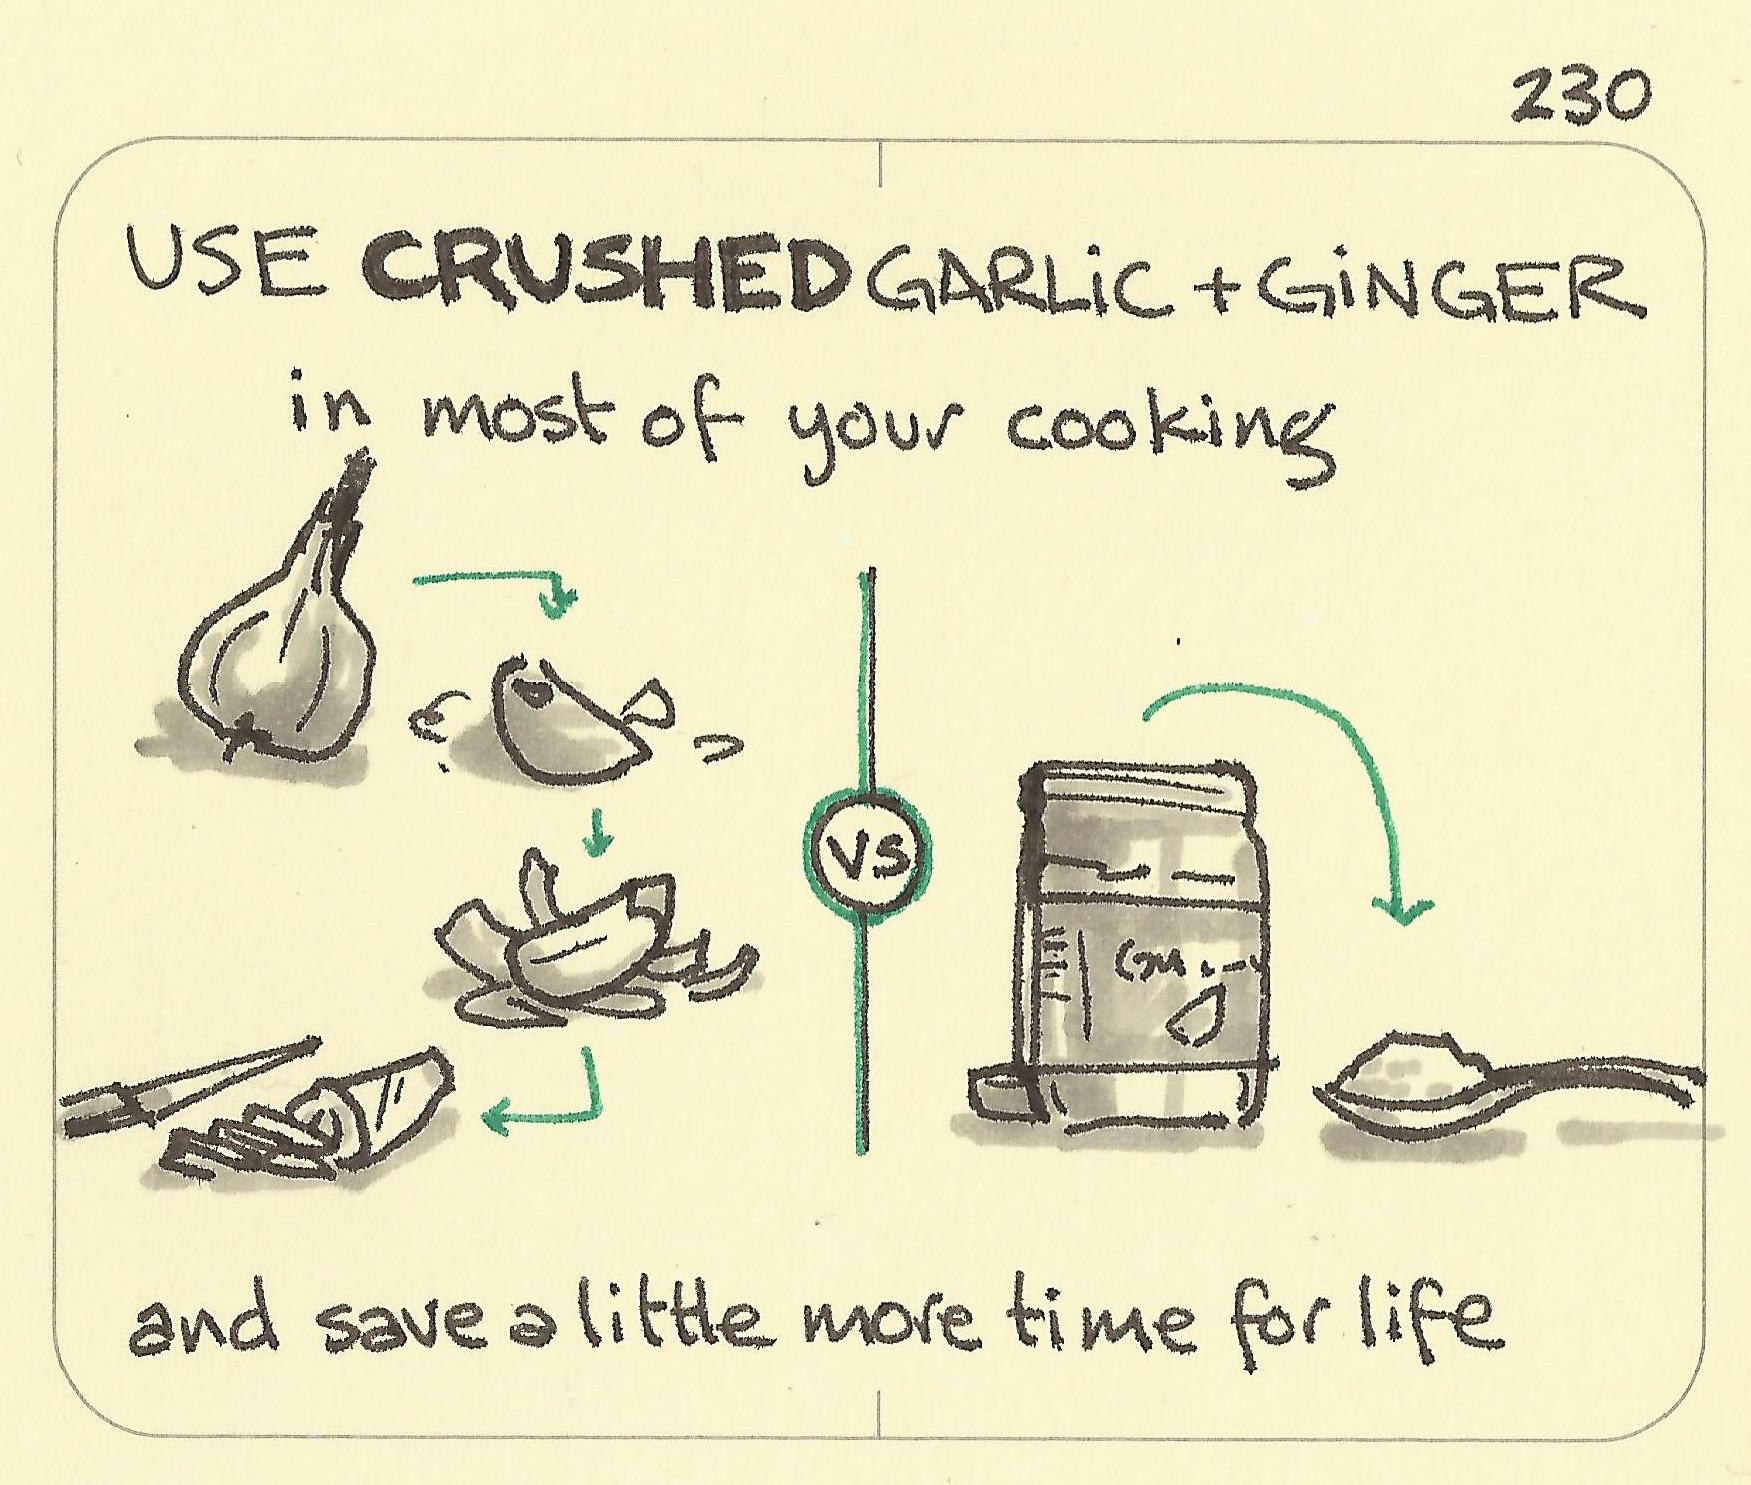 Use crushed garlic and ginger in most of your cooking - Sketchplanations